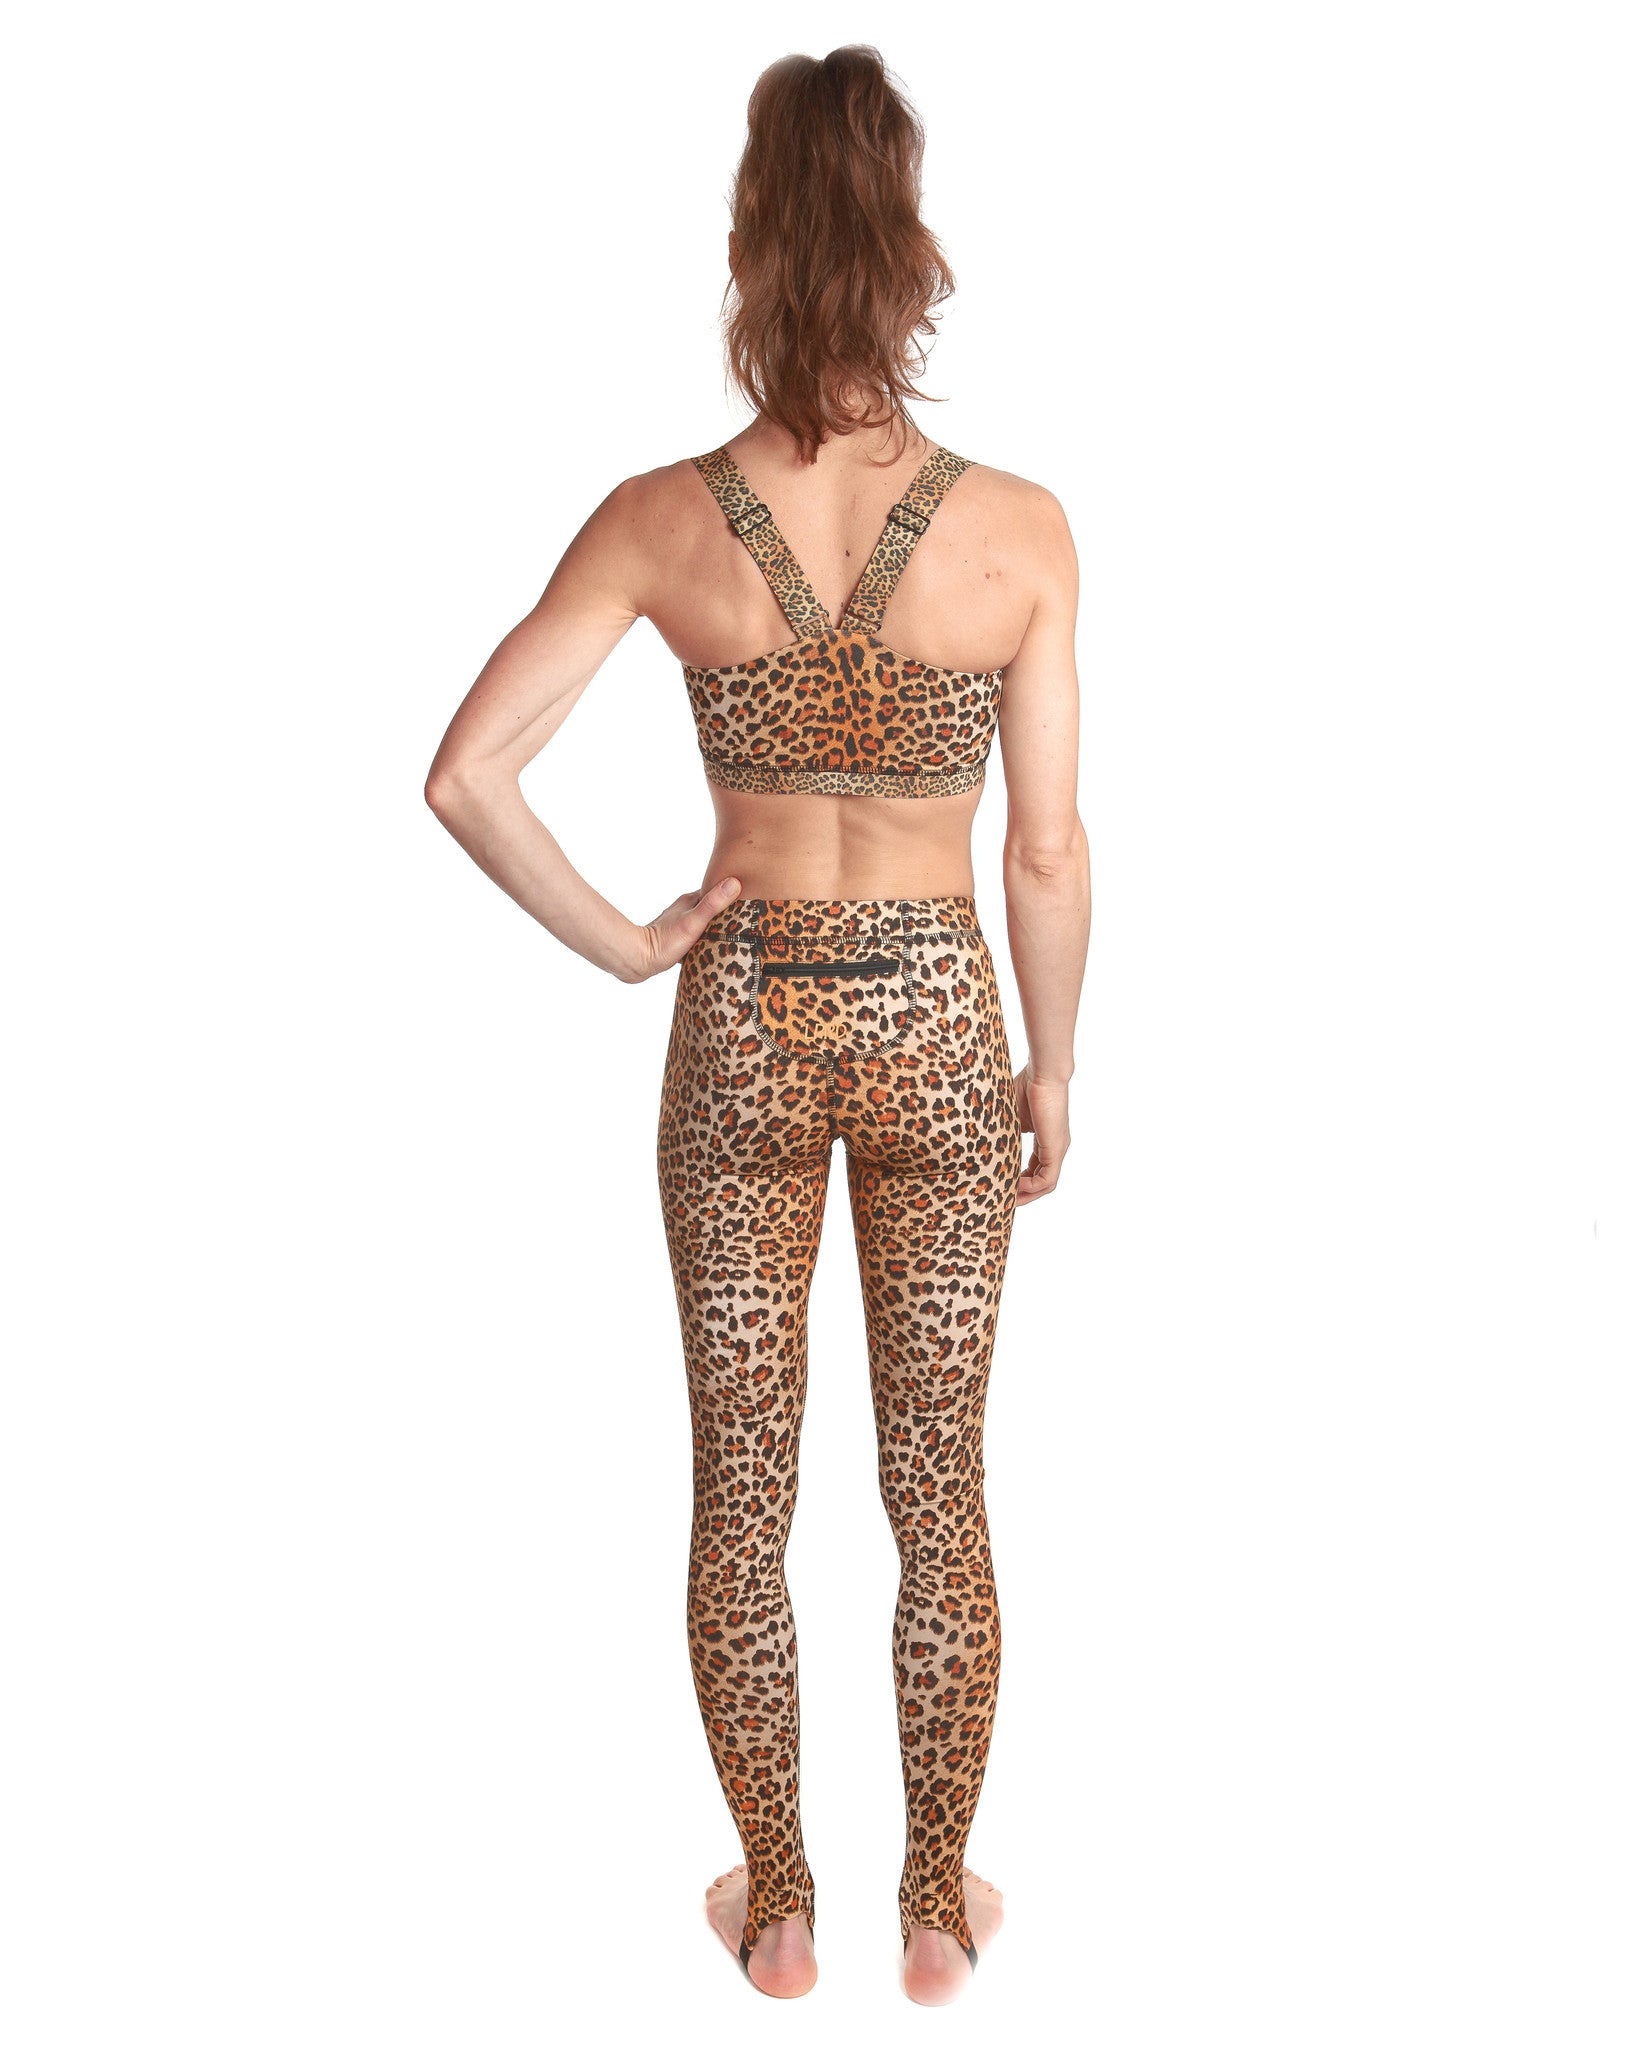 Leopard print gym leggings - Printed tights for workouts like yoga,  running, cycling or swimming - Premium quality Italian fabric - By LPRD